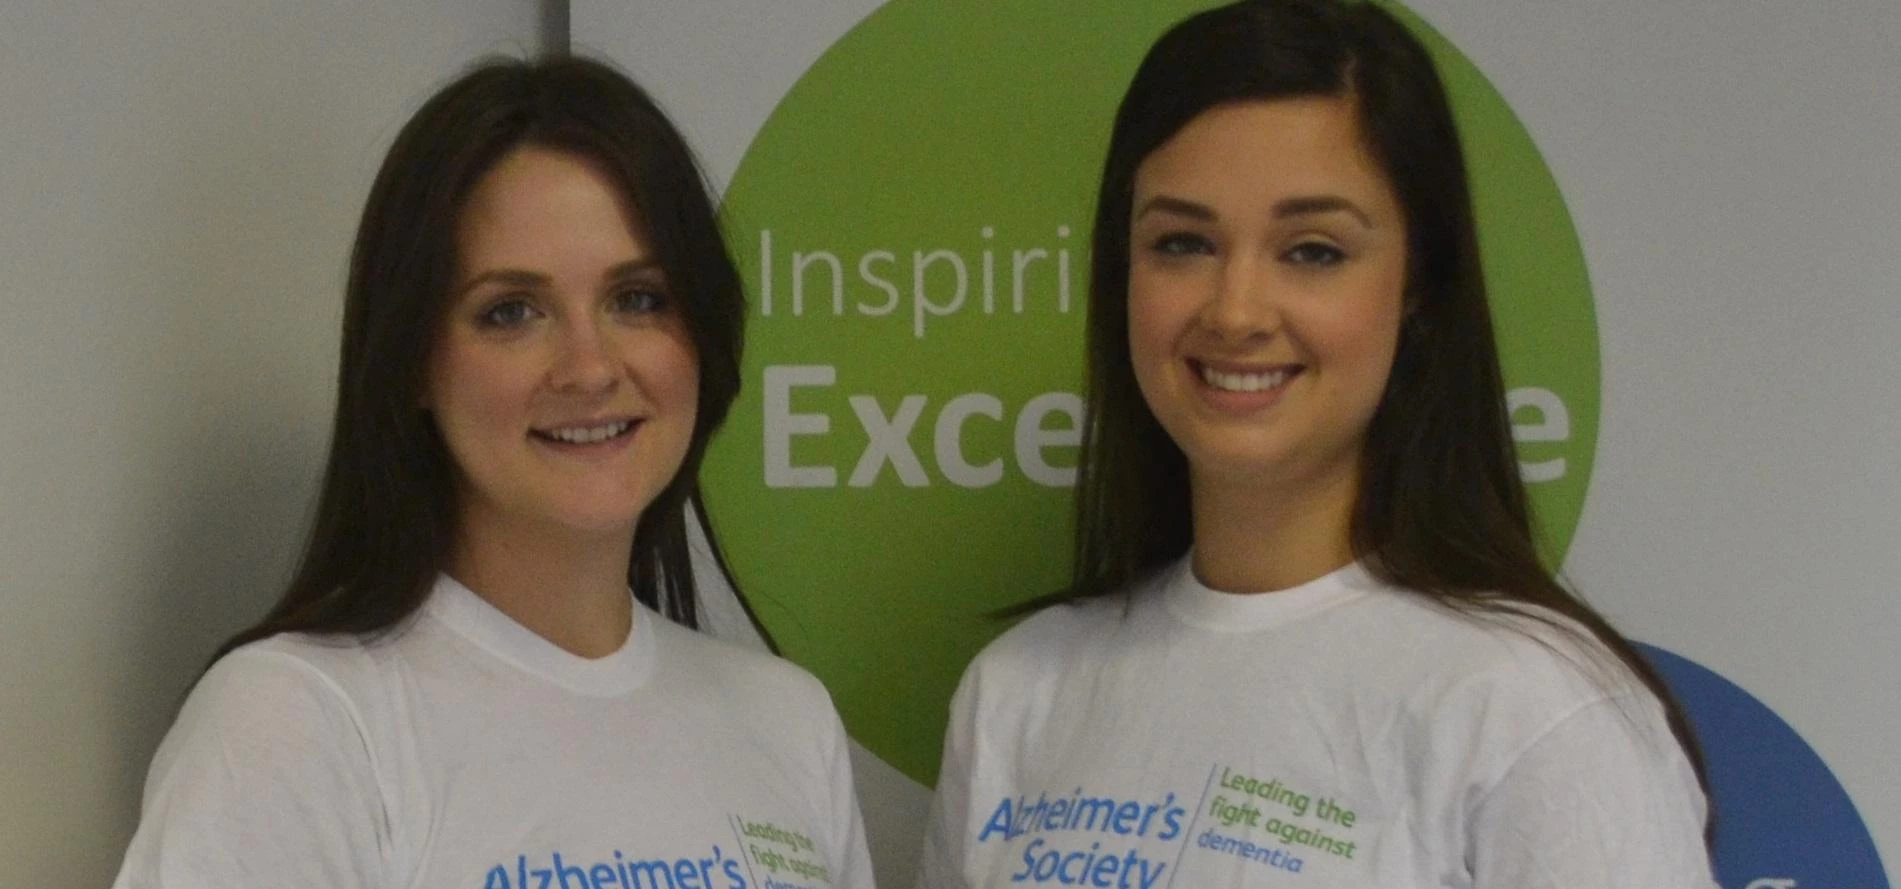 Awbery’s Marketing Coordinator Lucy Lewis (left) with Danielle Hindle, Alzheimer’s Society Community